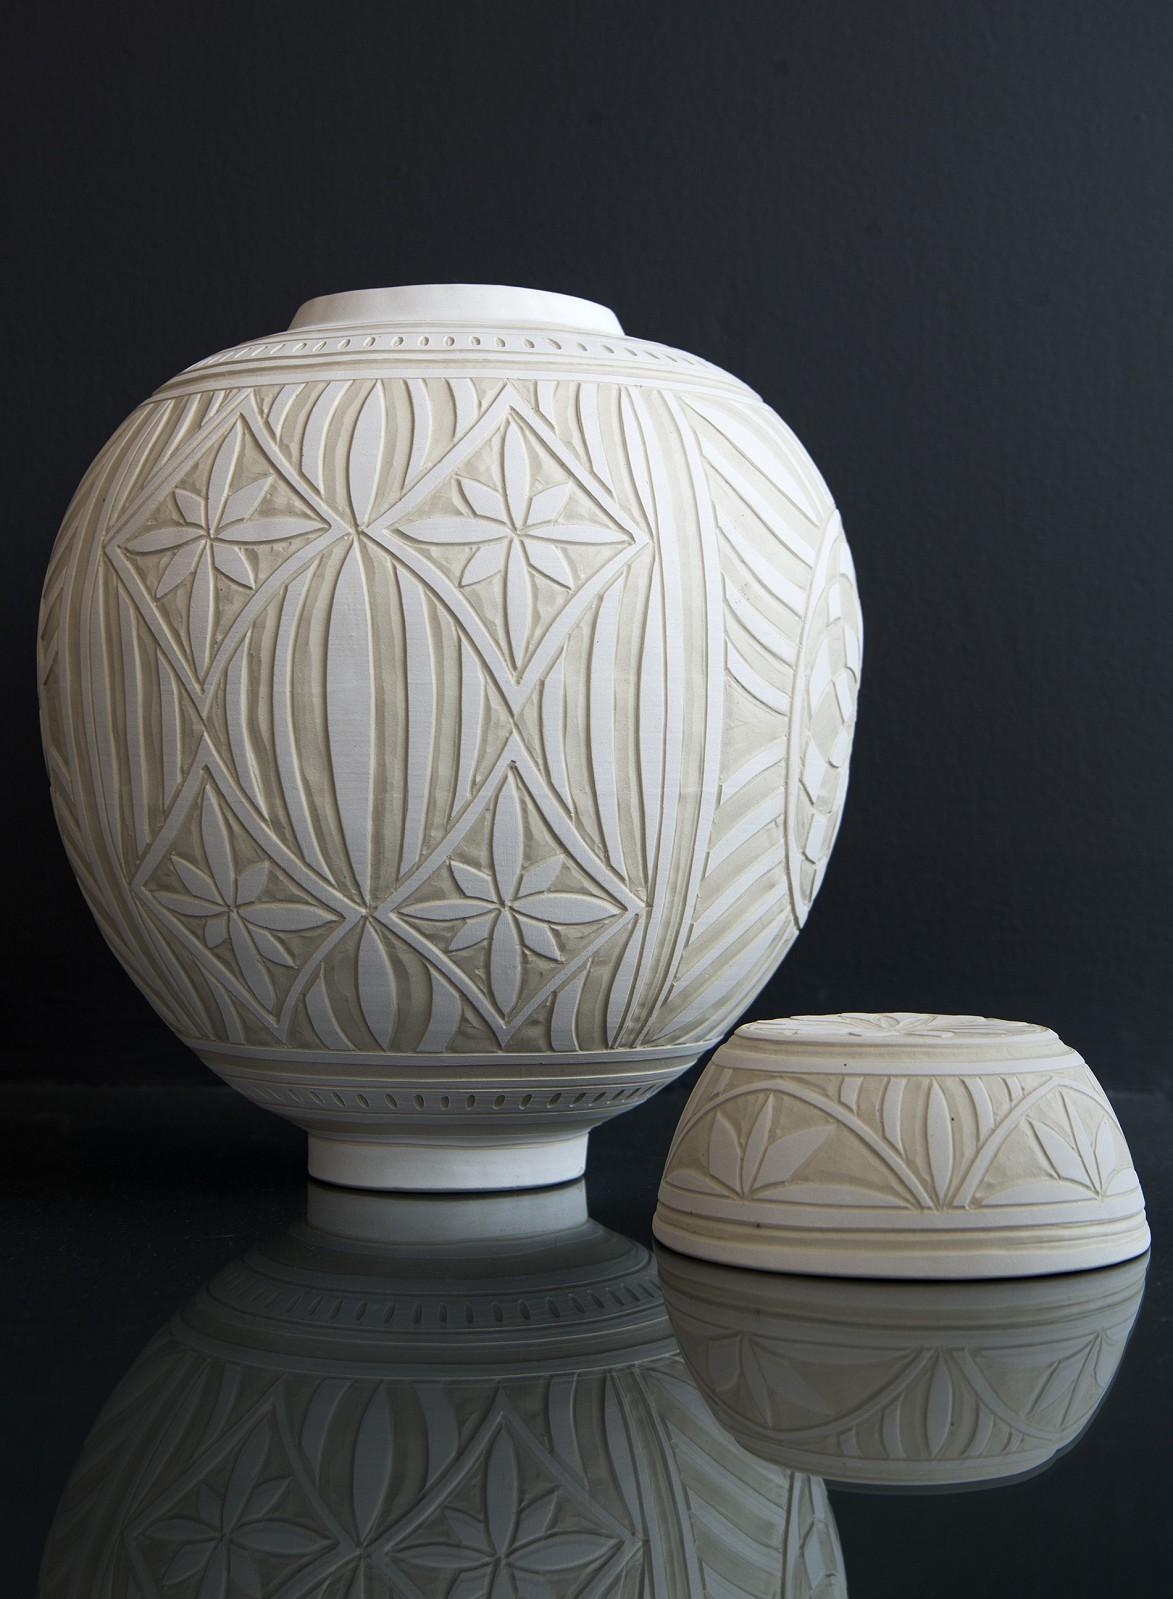 This beautifully detailed medium-sized porcelain vessel was created by ceramicist Loren Kaplan. 

‘Ginger jars’ were first used in China thousands of years ago as a means of storing and shipping precious spices. Ginger became a popular spice in the